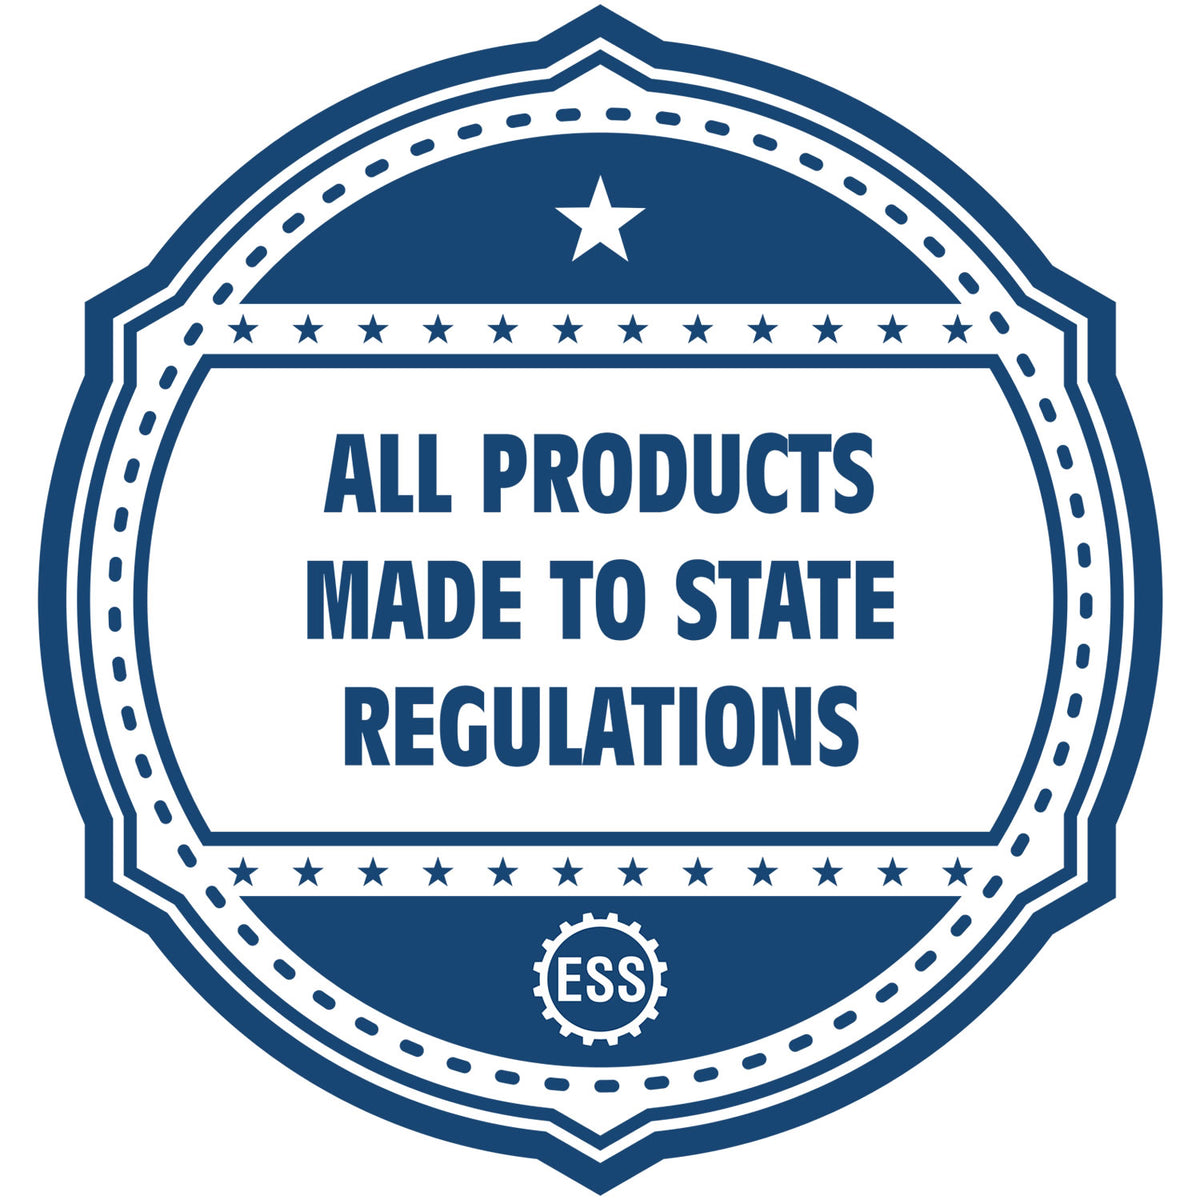 An icon or badge element for the Slim Pre-Inked Hawaii Professional Engineer Seal Stamp showing that this product is made in compliance with state regulations.